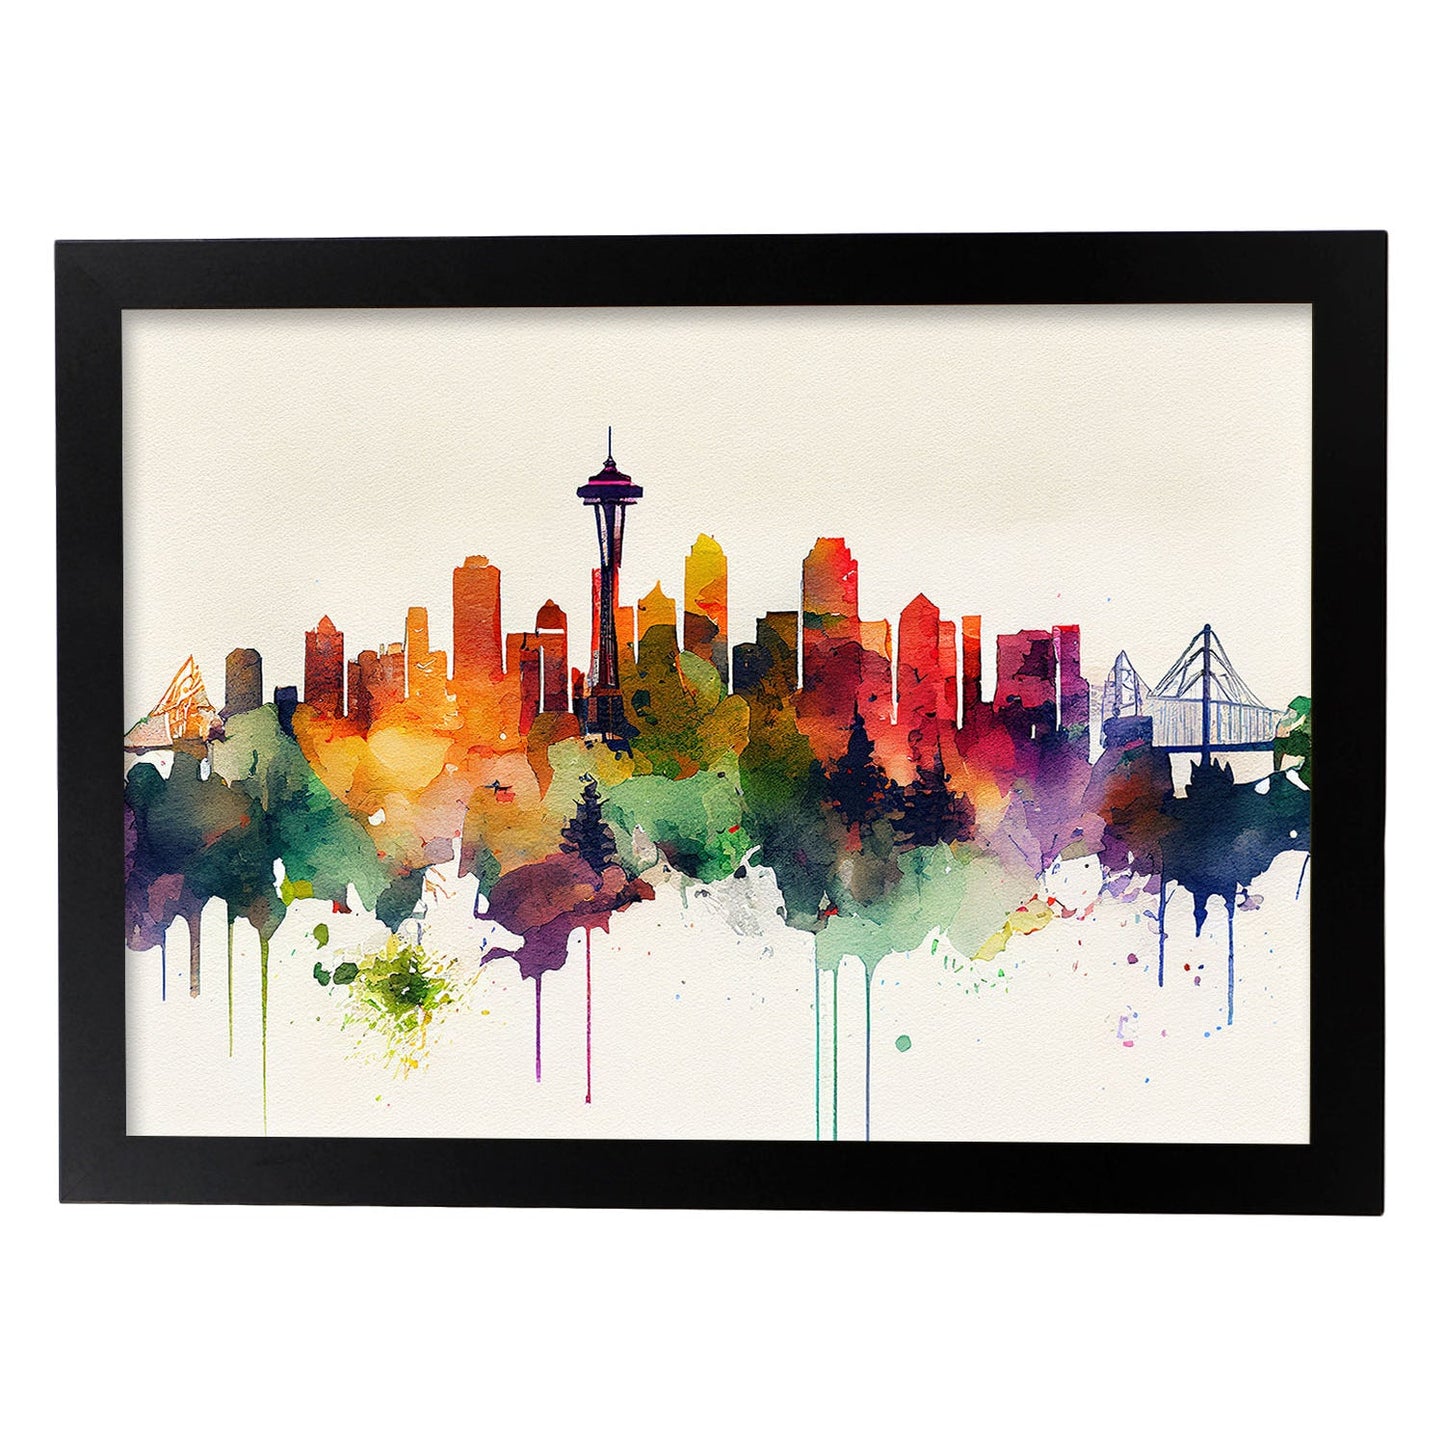 Nacnic watercolor of a skyline of the city of Seattle. Aesthetic Wall Art Prints for Bedroom or Living Room Design.